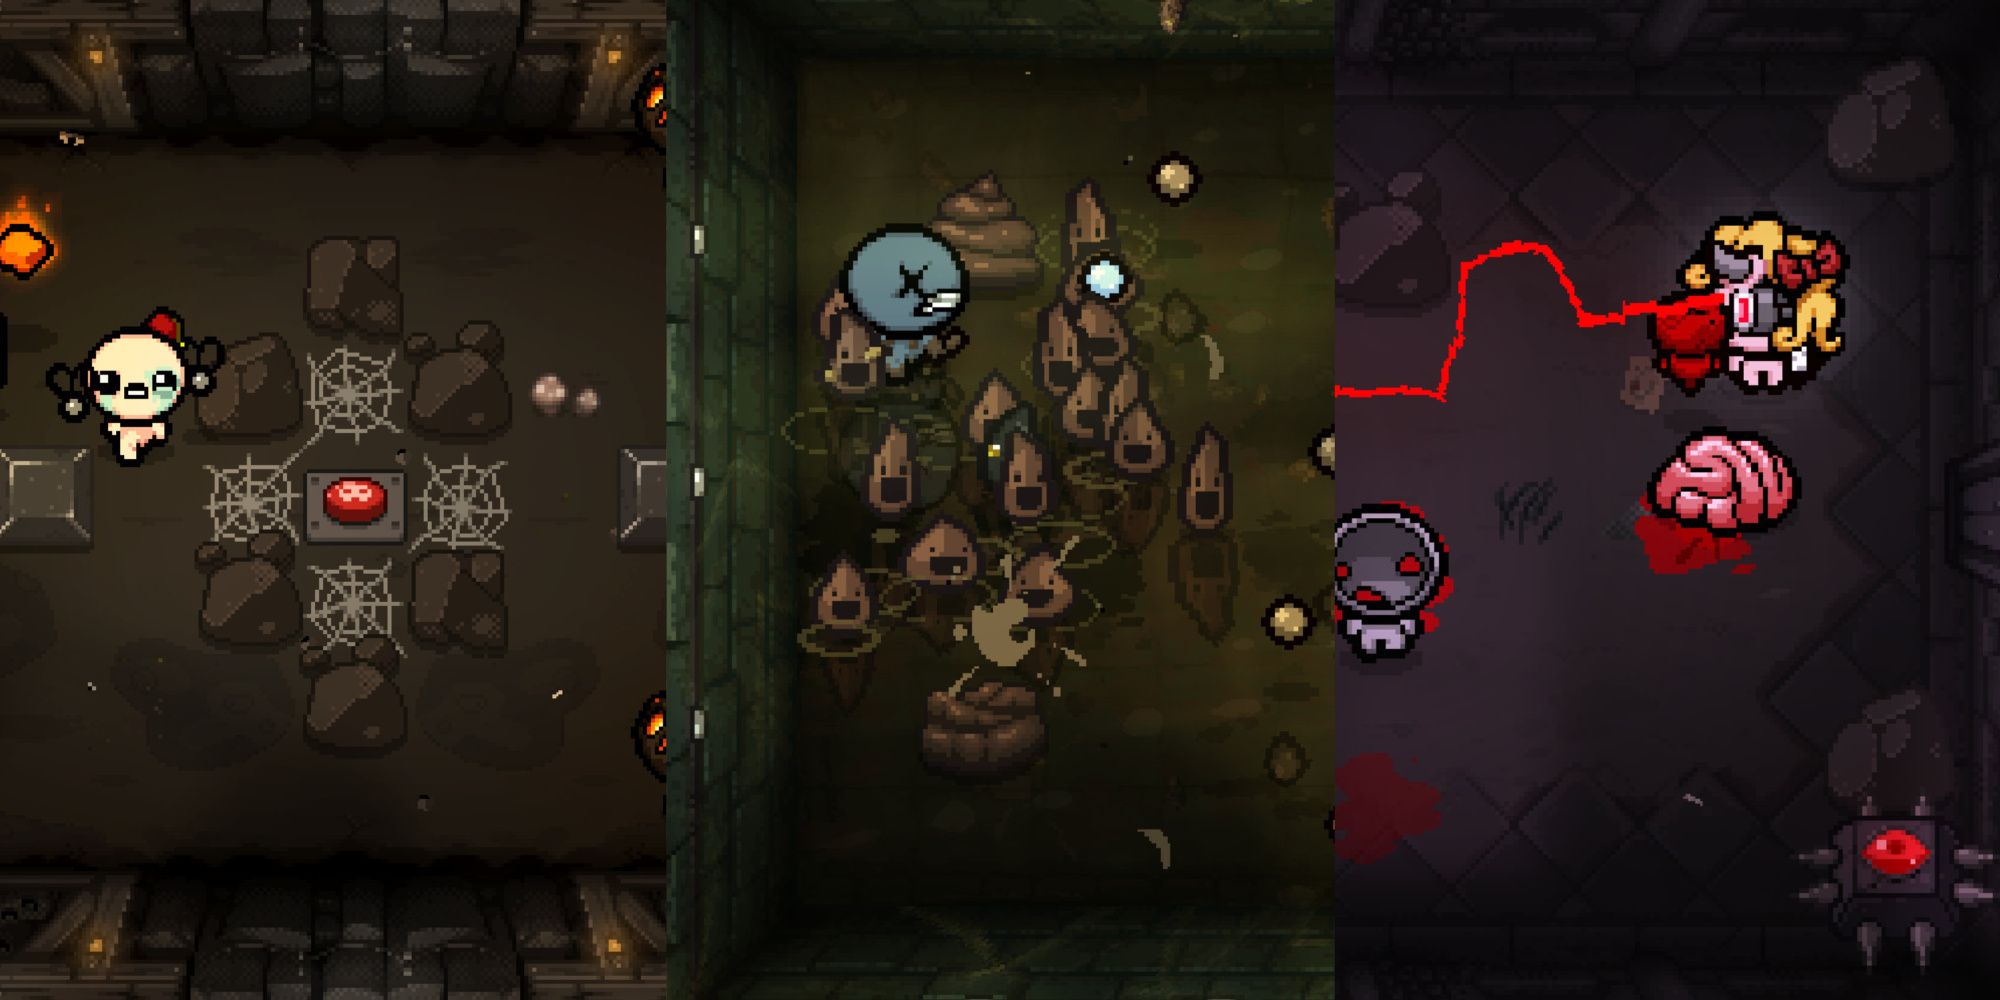 A collage showing three different characters in the Binding of Isaac: Repenteance.